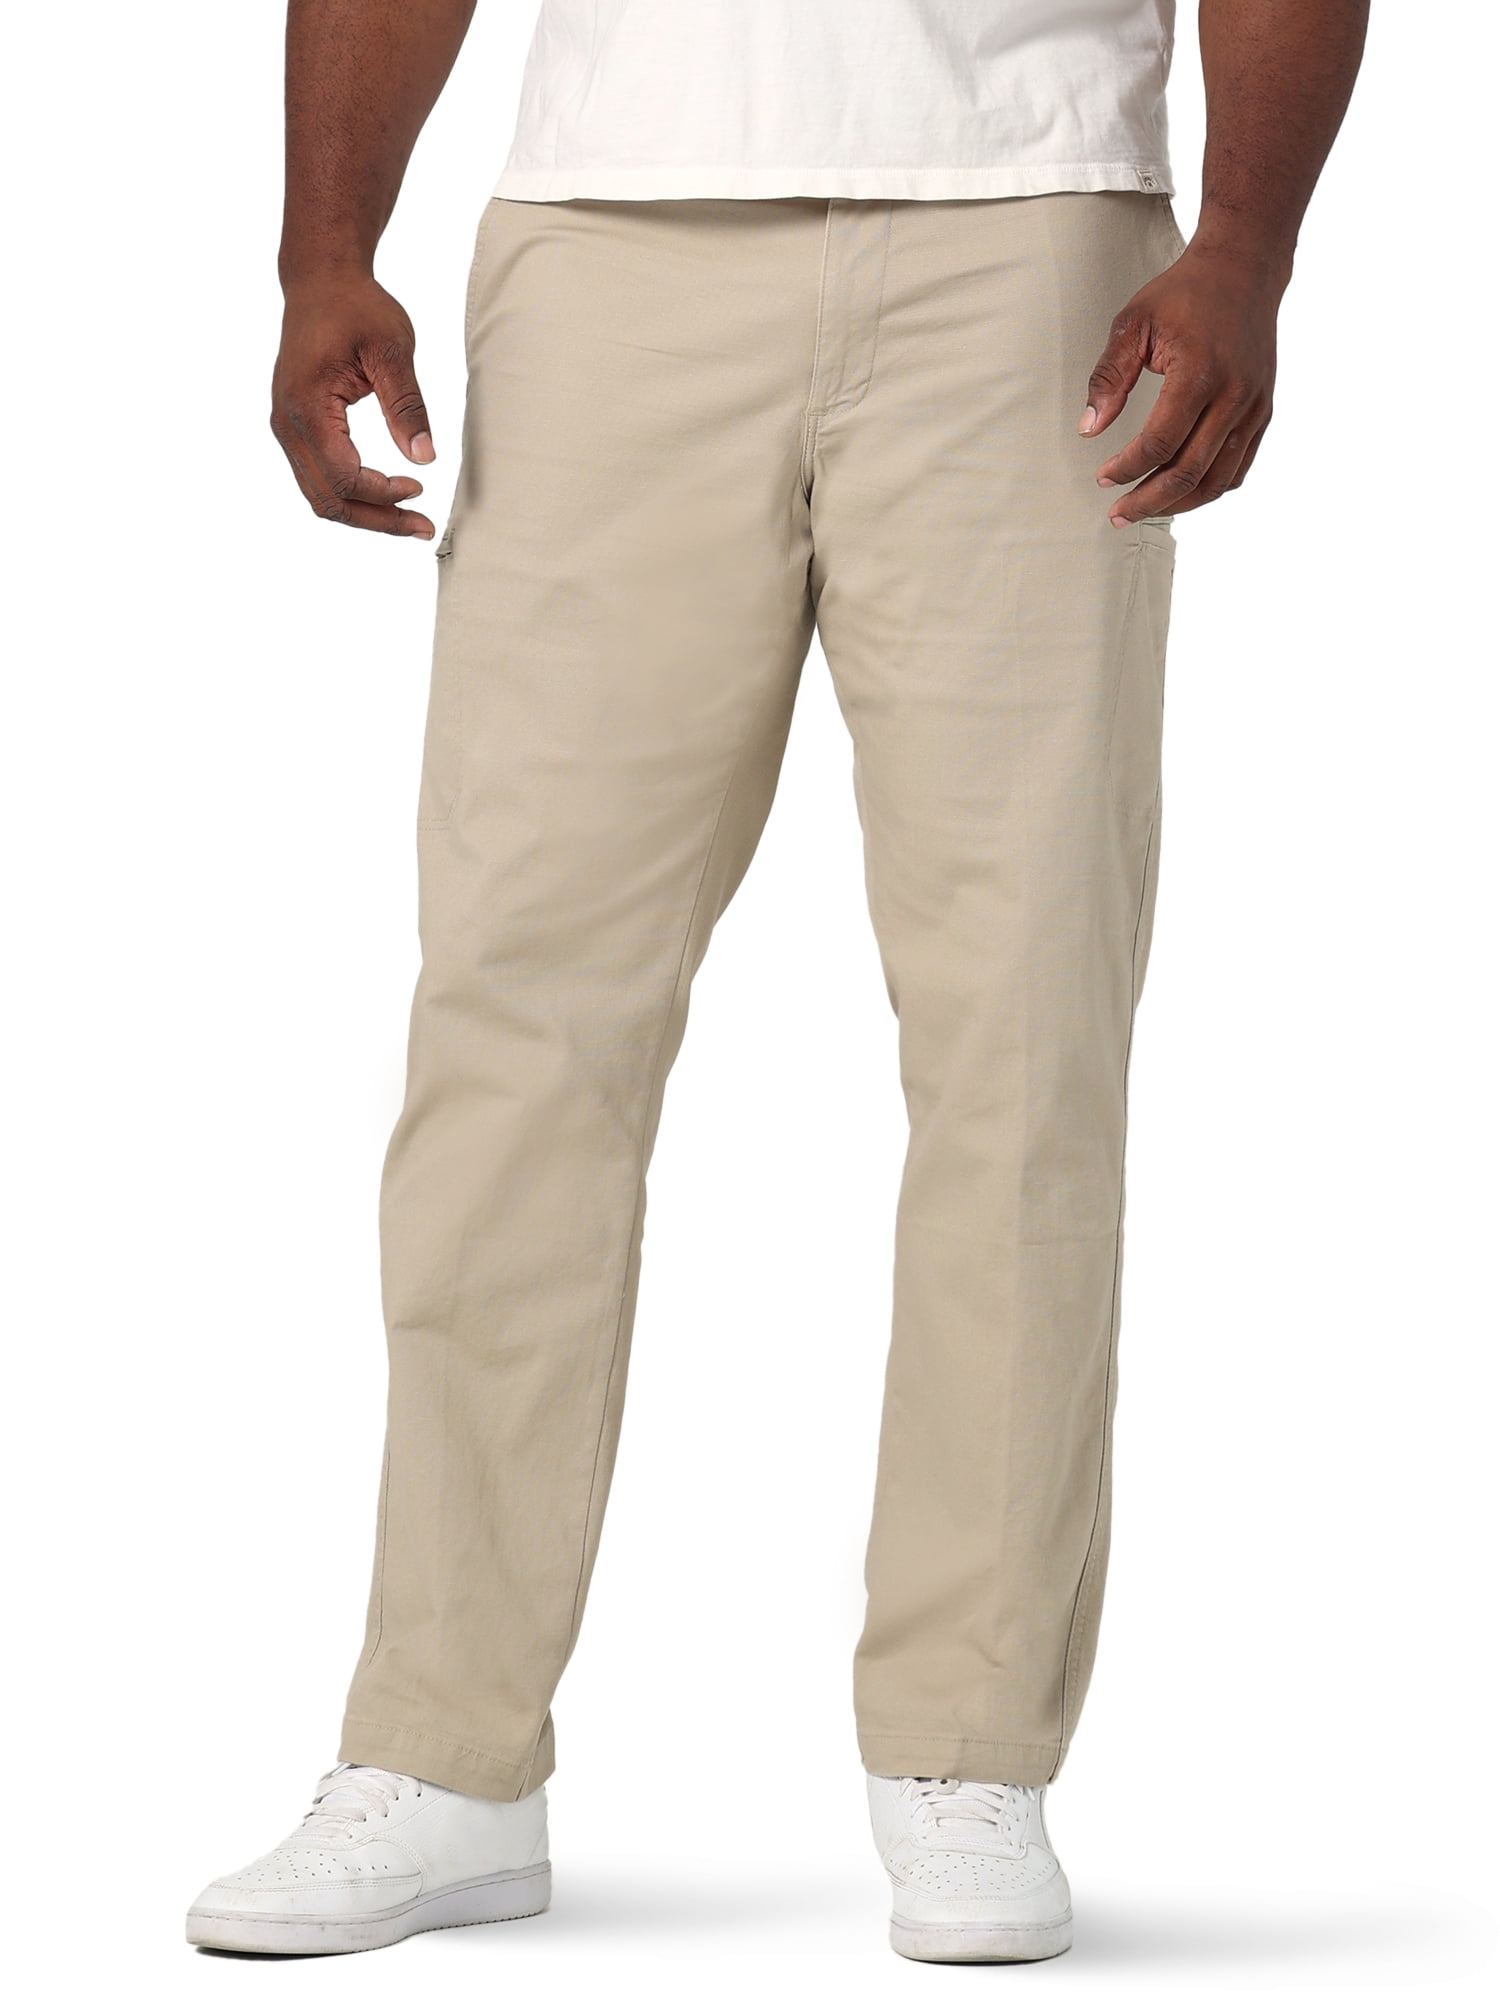 Lee Jeans Cargo Pants products for sale  eBay